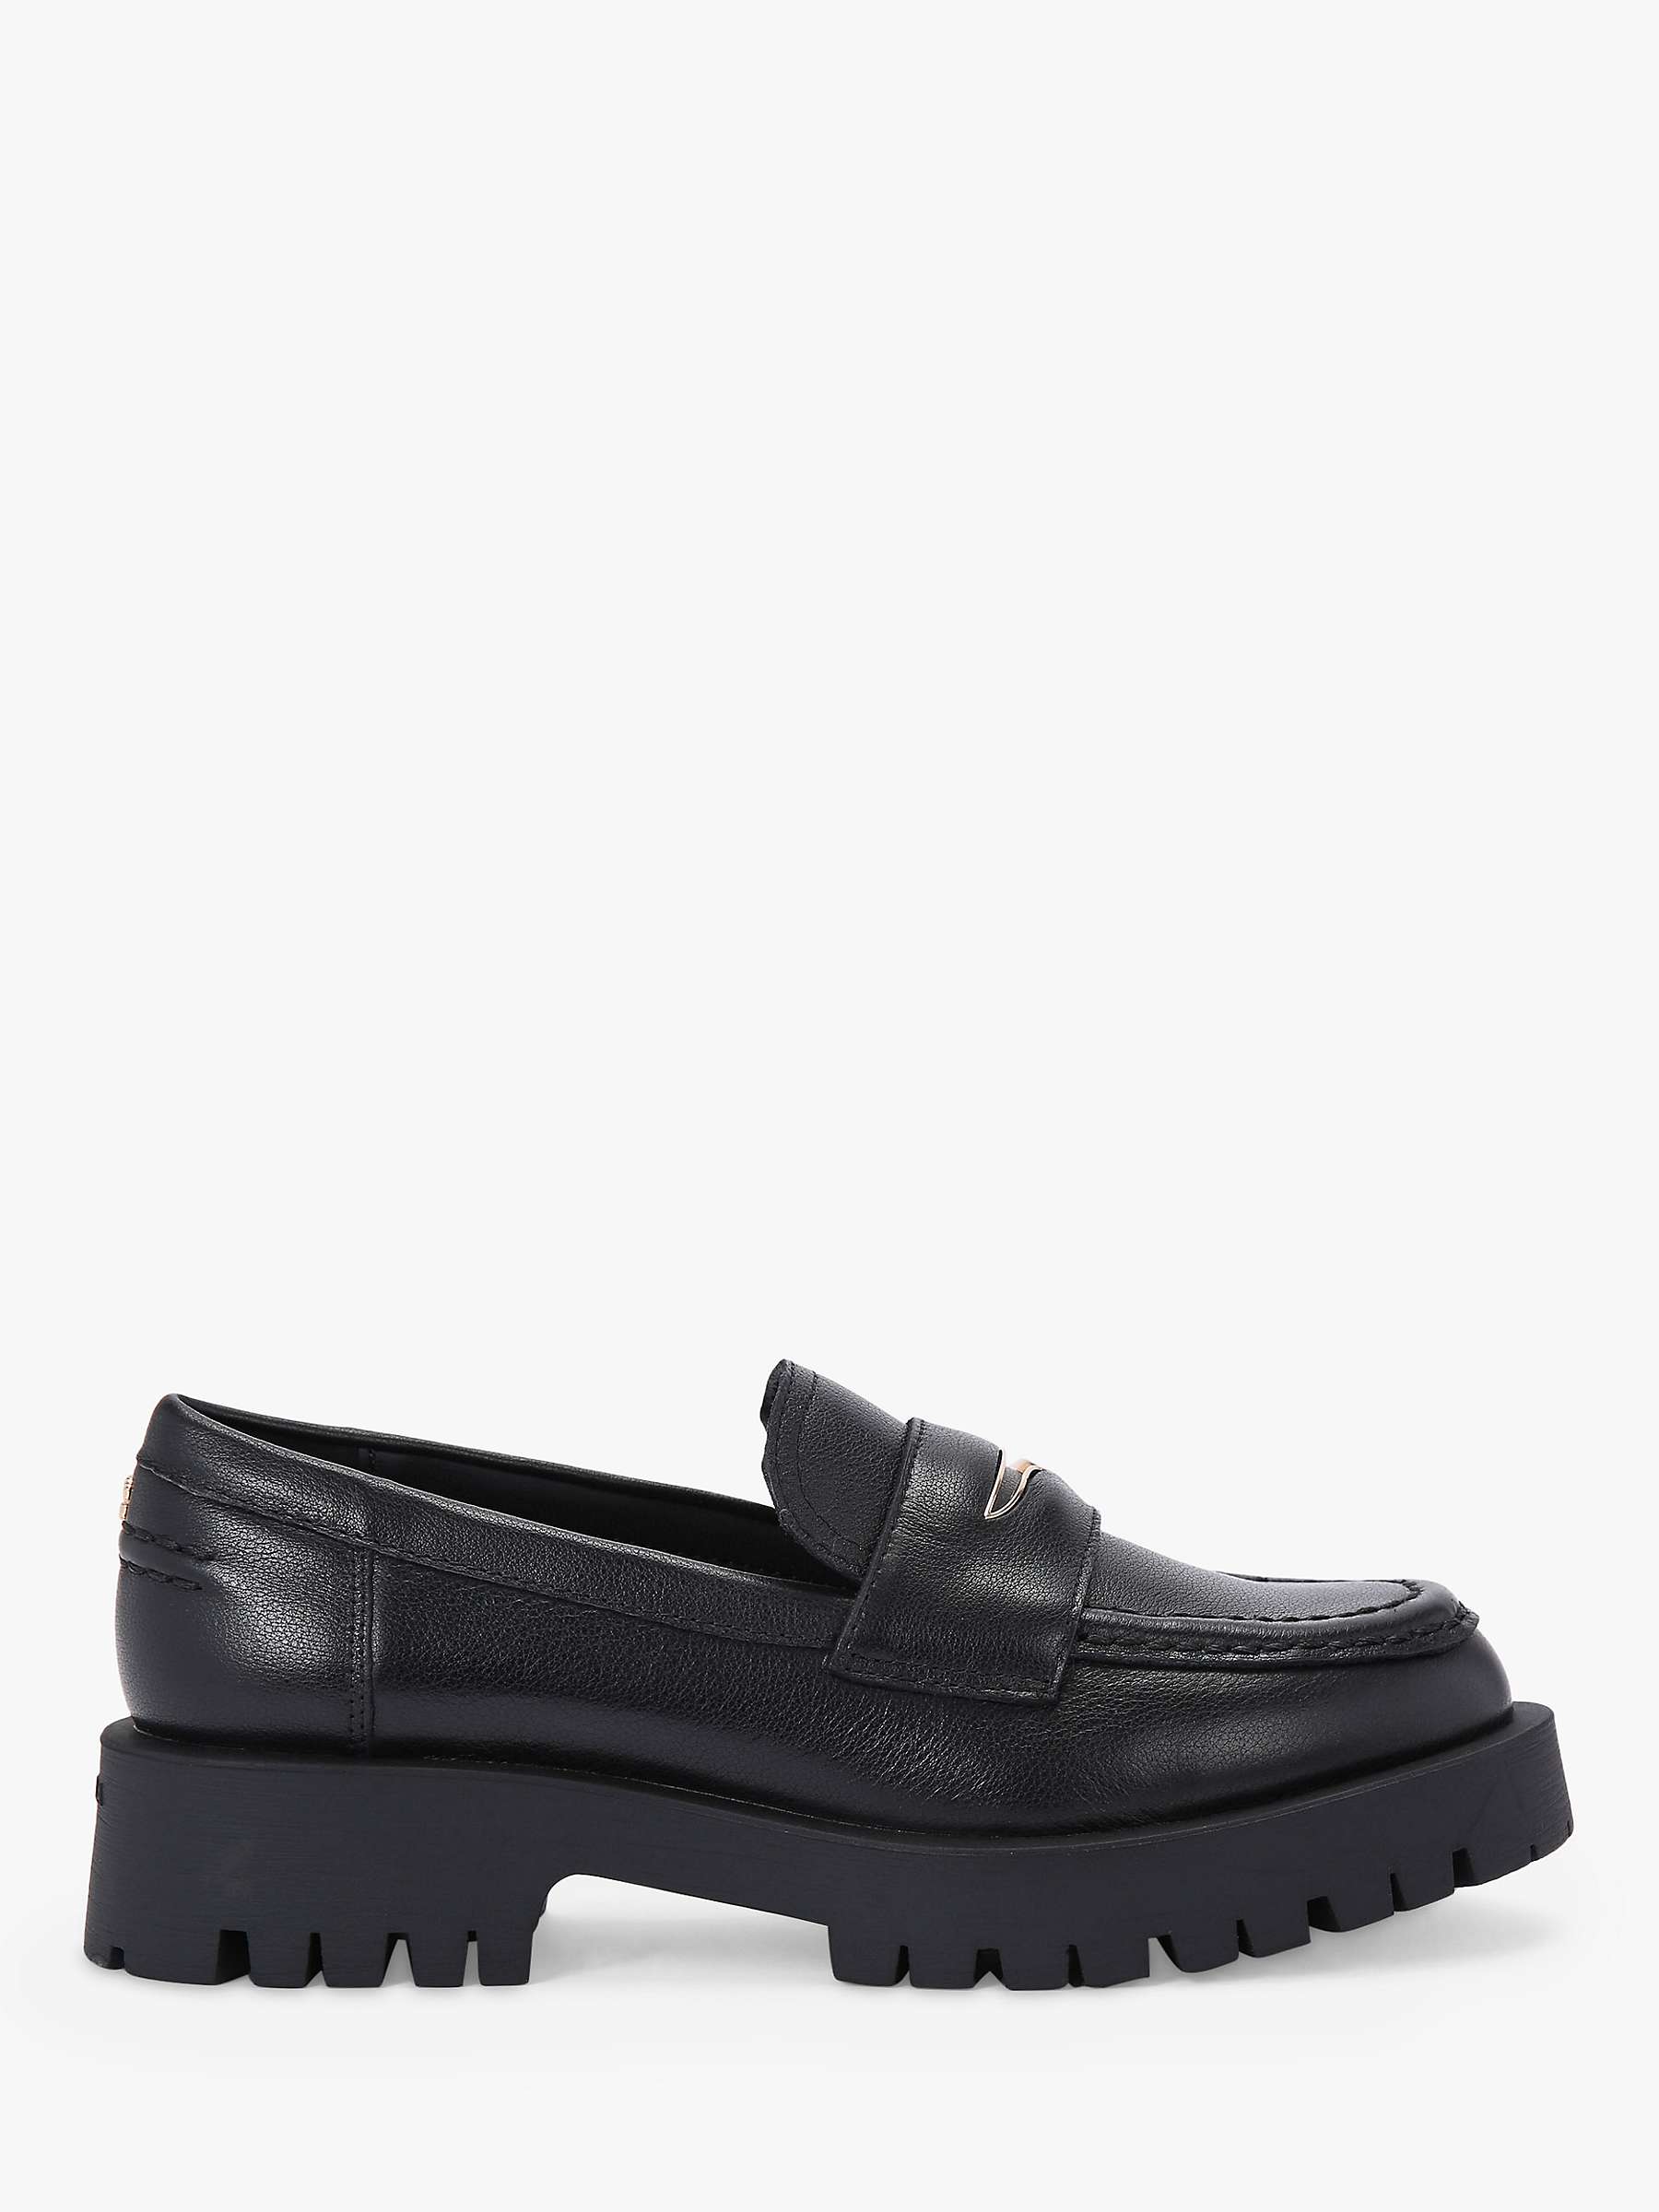 Carvela Stomper 2 Chunky Leather Loafers, Black at John Lewis & Partners